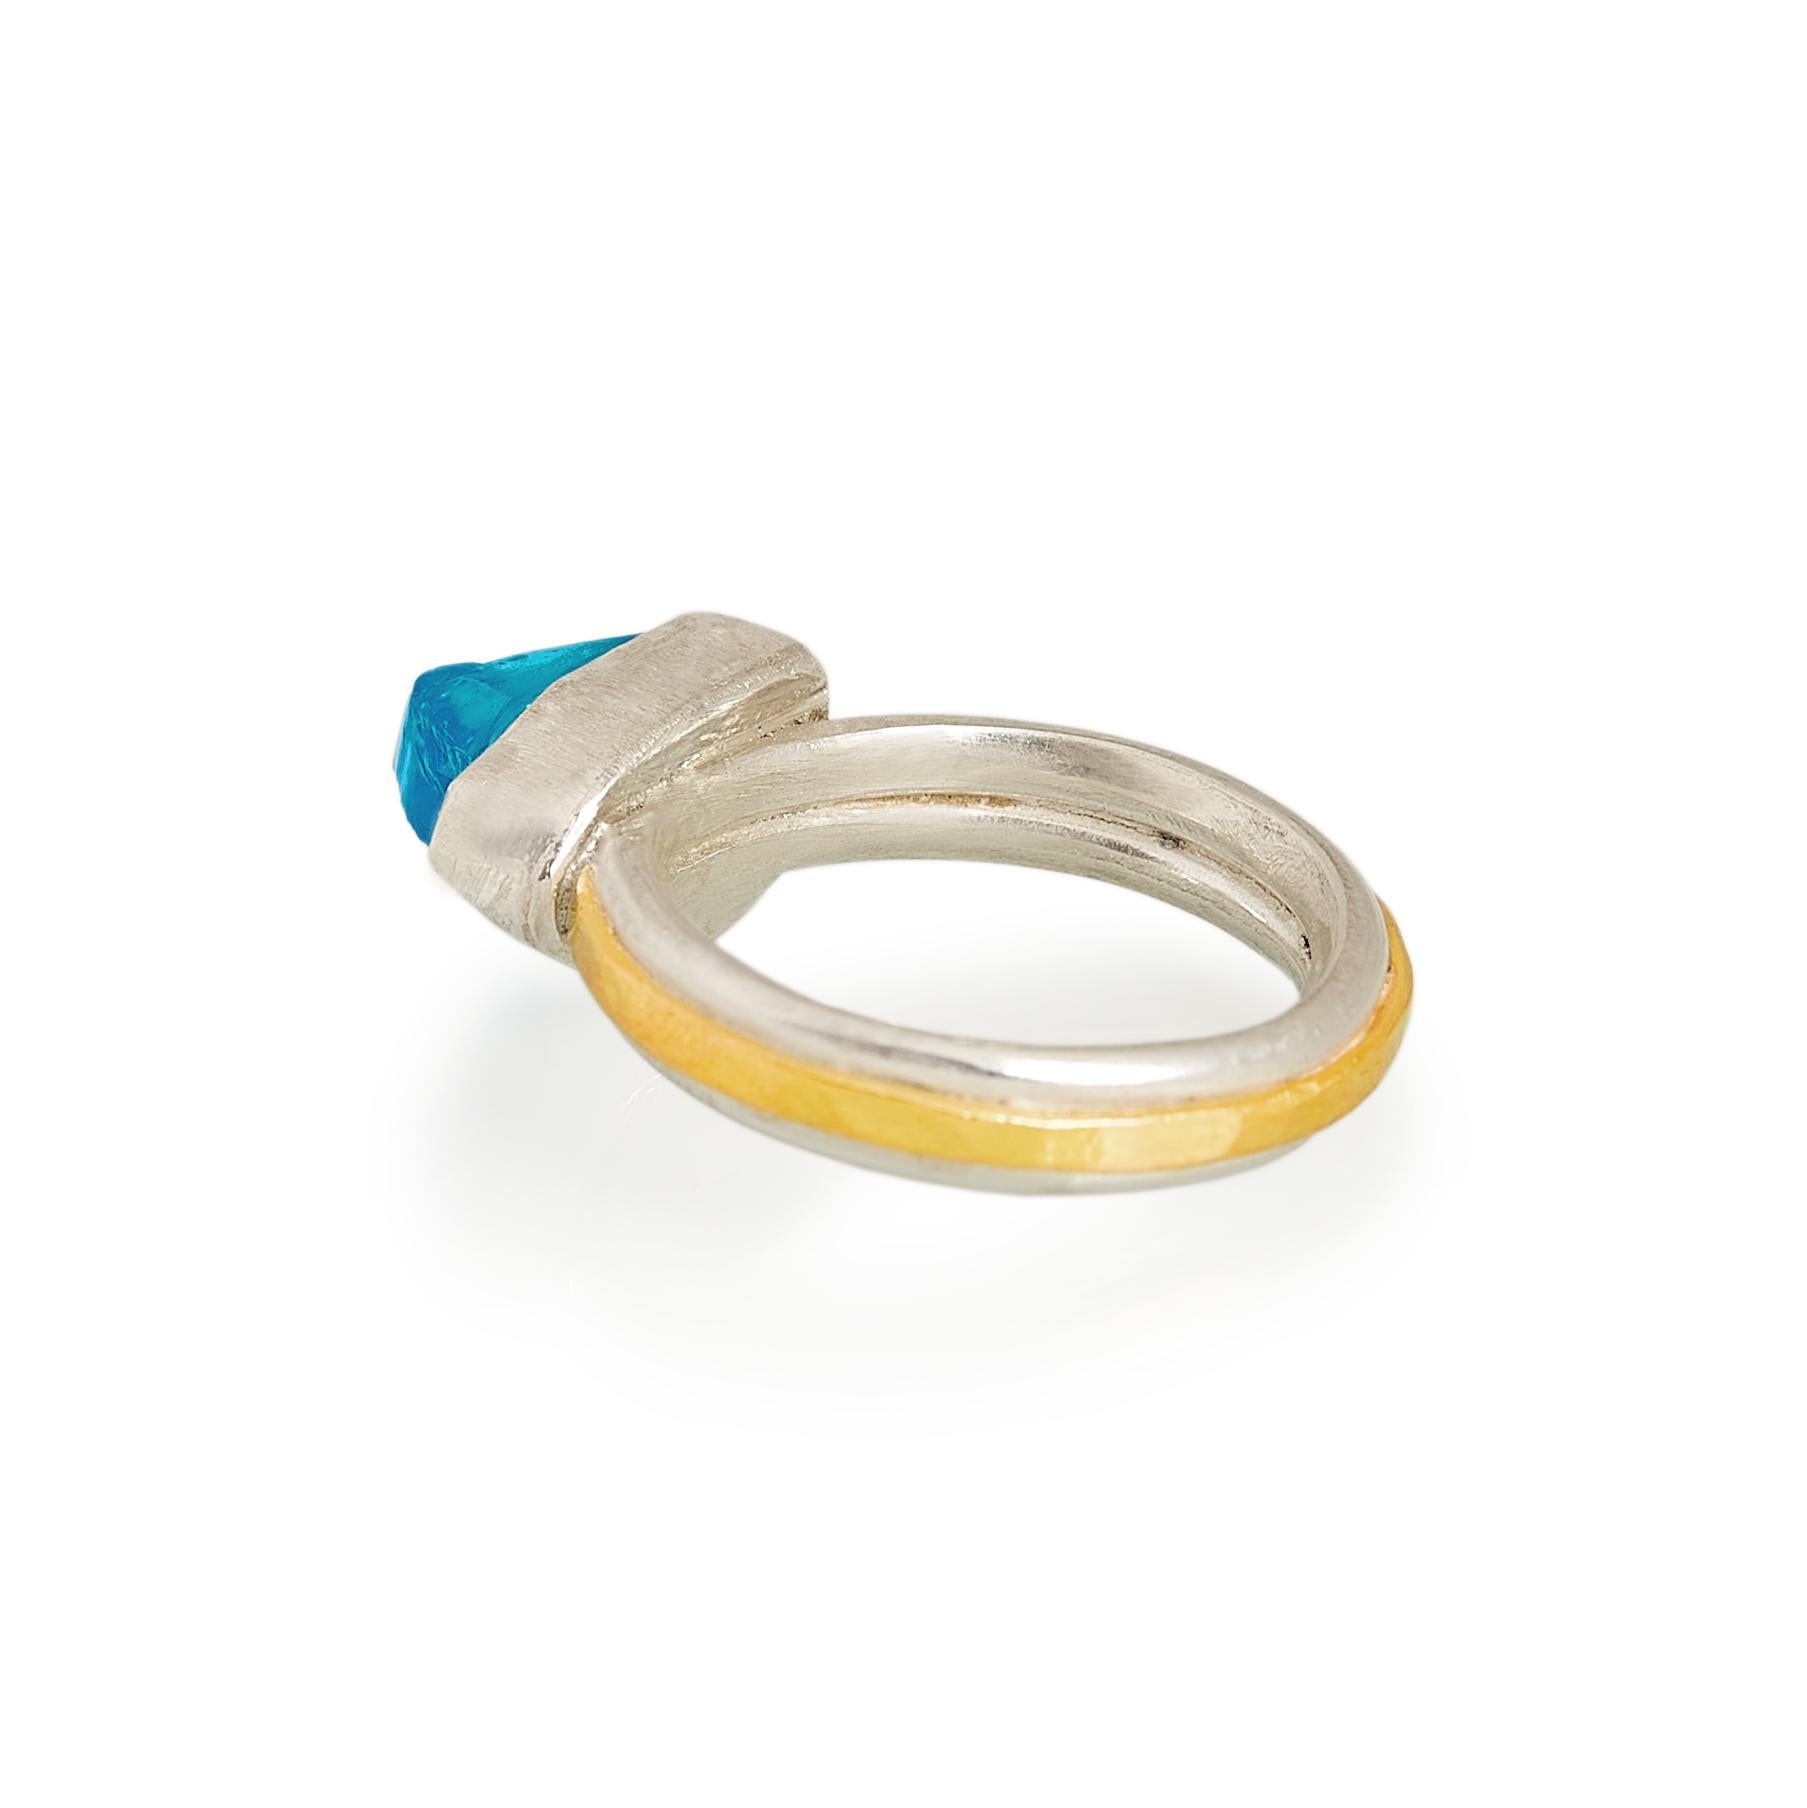 Crisp and fresh blue topaz ring made in sterling silver with a band of 18 karat gold. The topaz stone has an unusual cut that lets a lot of light through.

U.S ring size: 6 ¾
U.K size: N

British hallmarks

Please don't hesitate to contact us if you